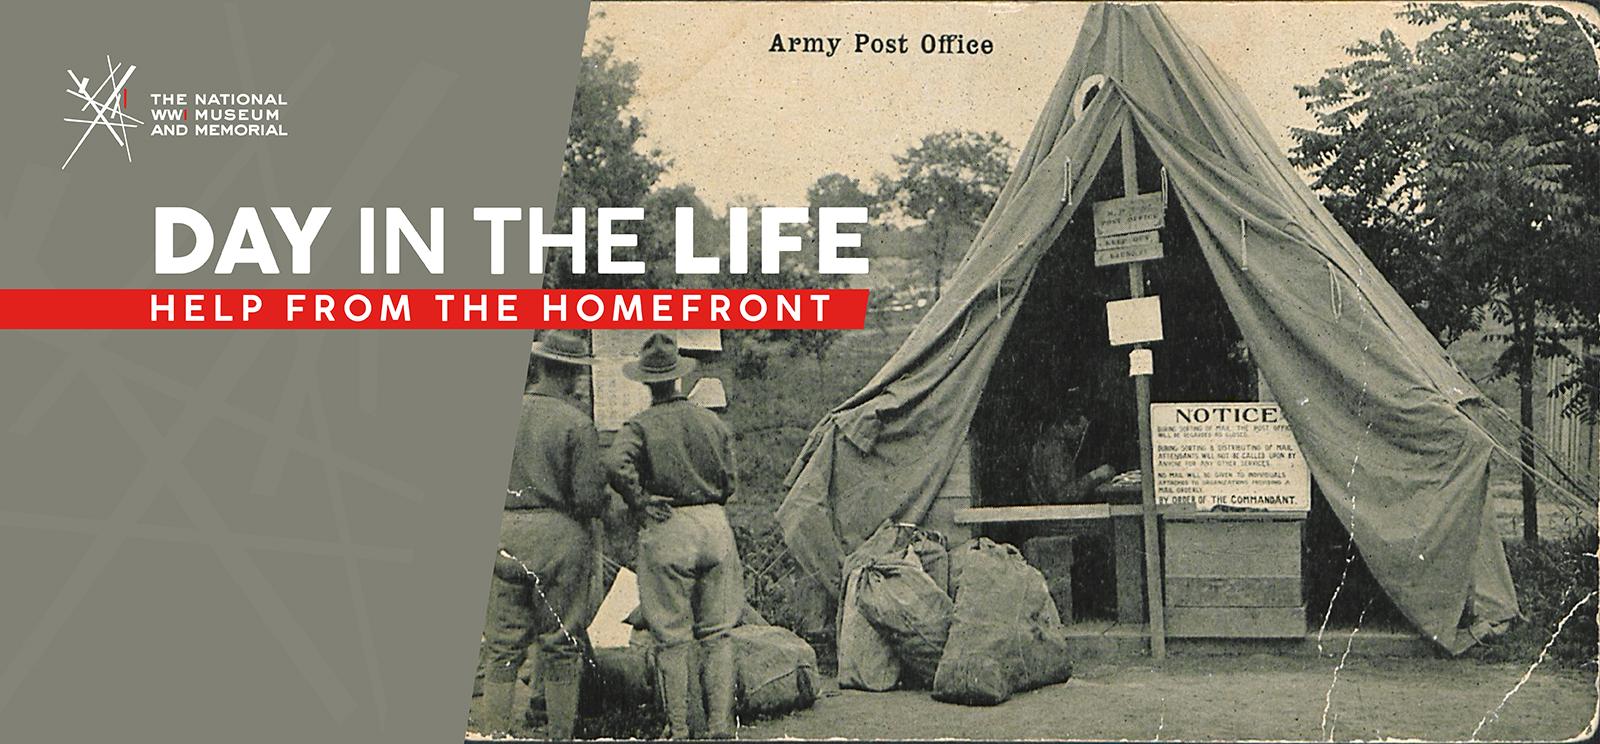 Image: Black and white photo of a large canvas tent with boxes, bags and tables scattered inside and in front of it. Soldiers gather around doing various mail-related tasks. Text: 'Day in the Life / Help from the Homefront'